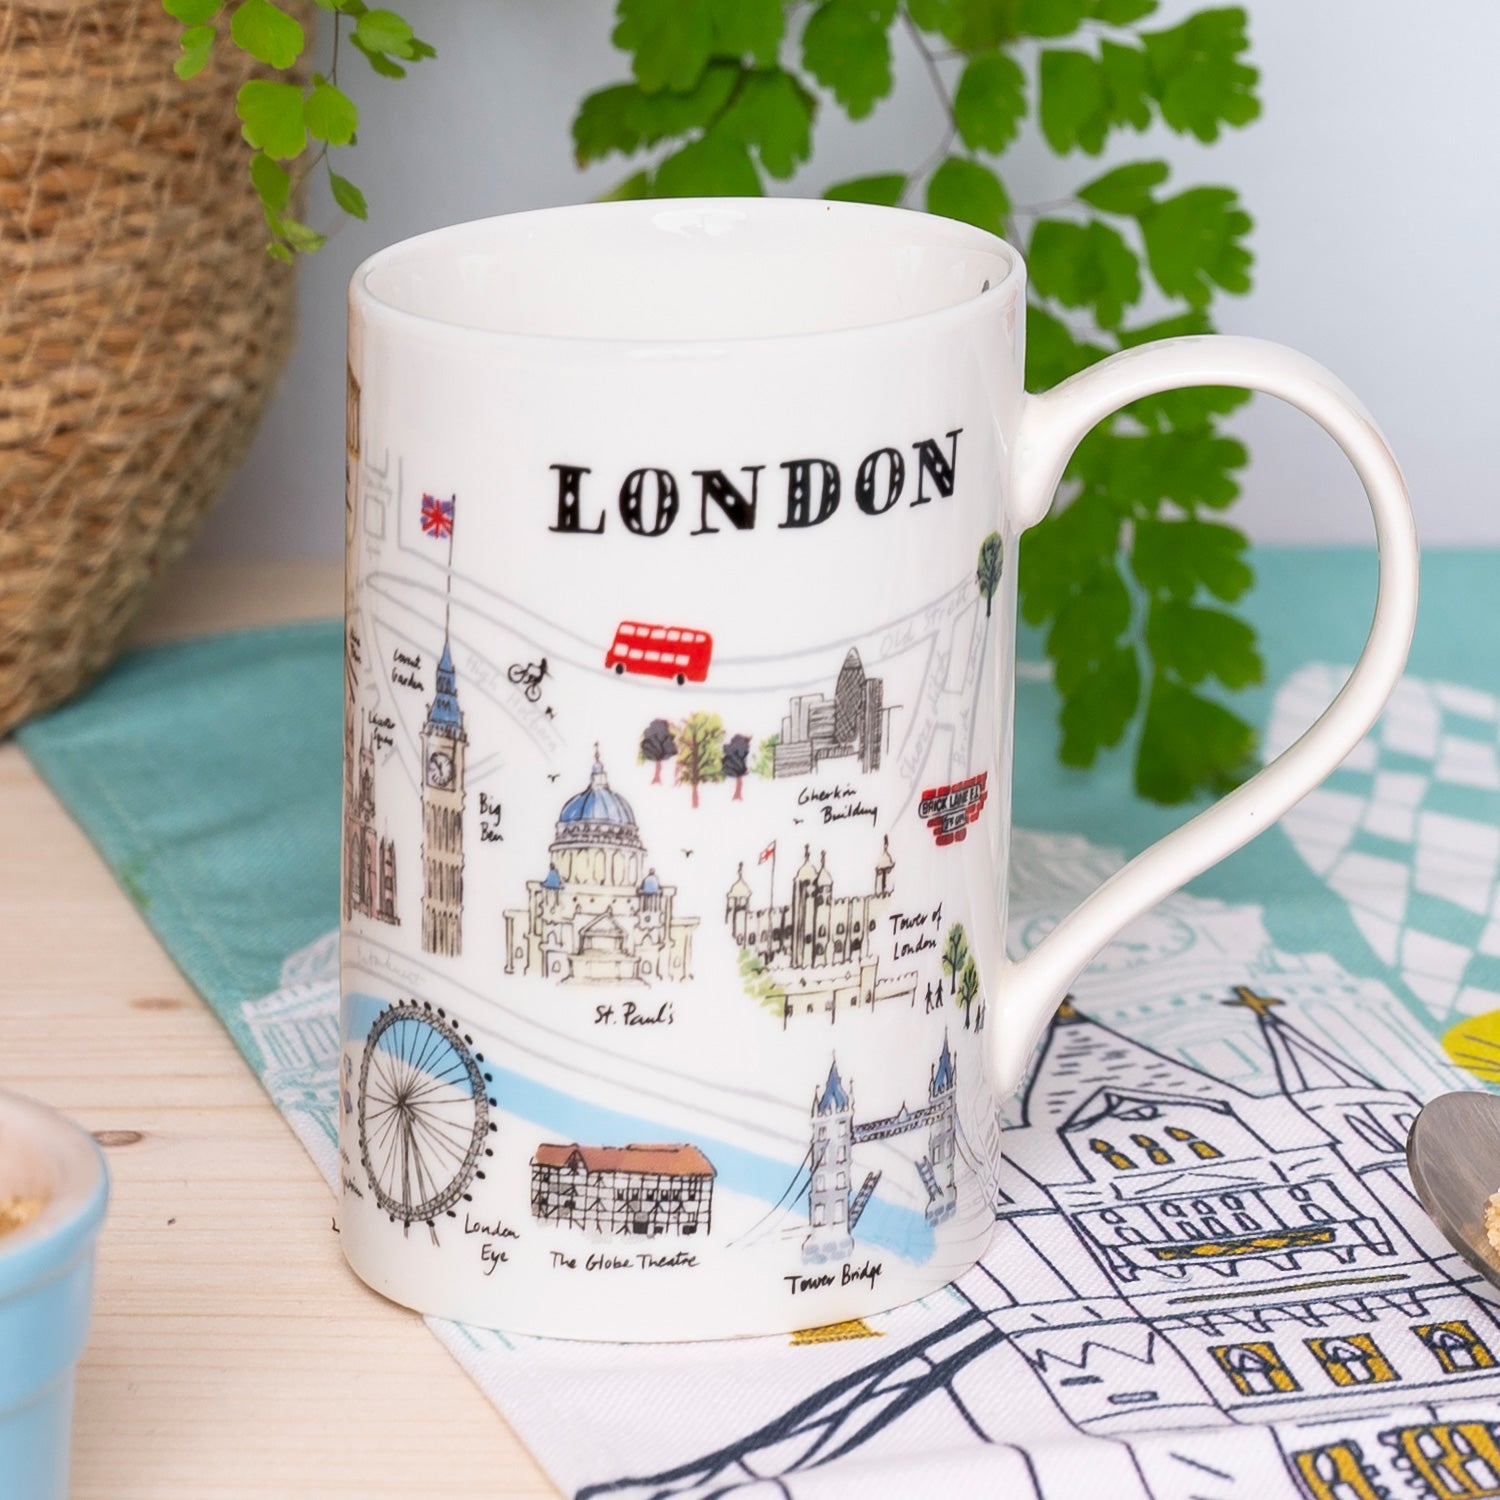 Mugs and cups from Tower Bridge